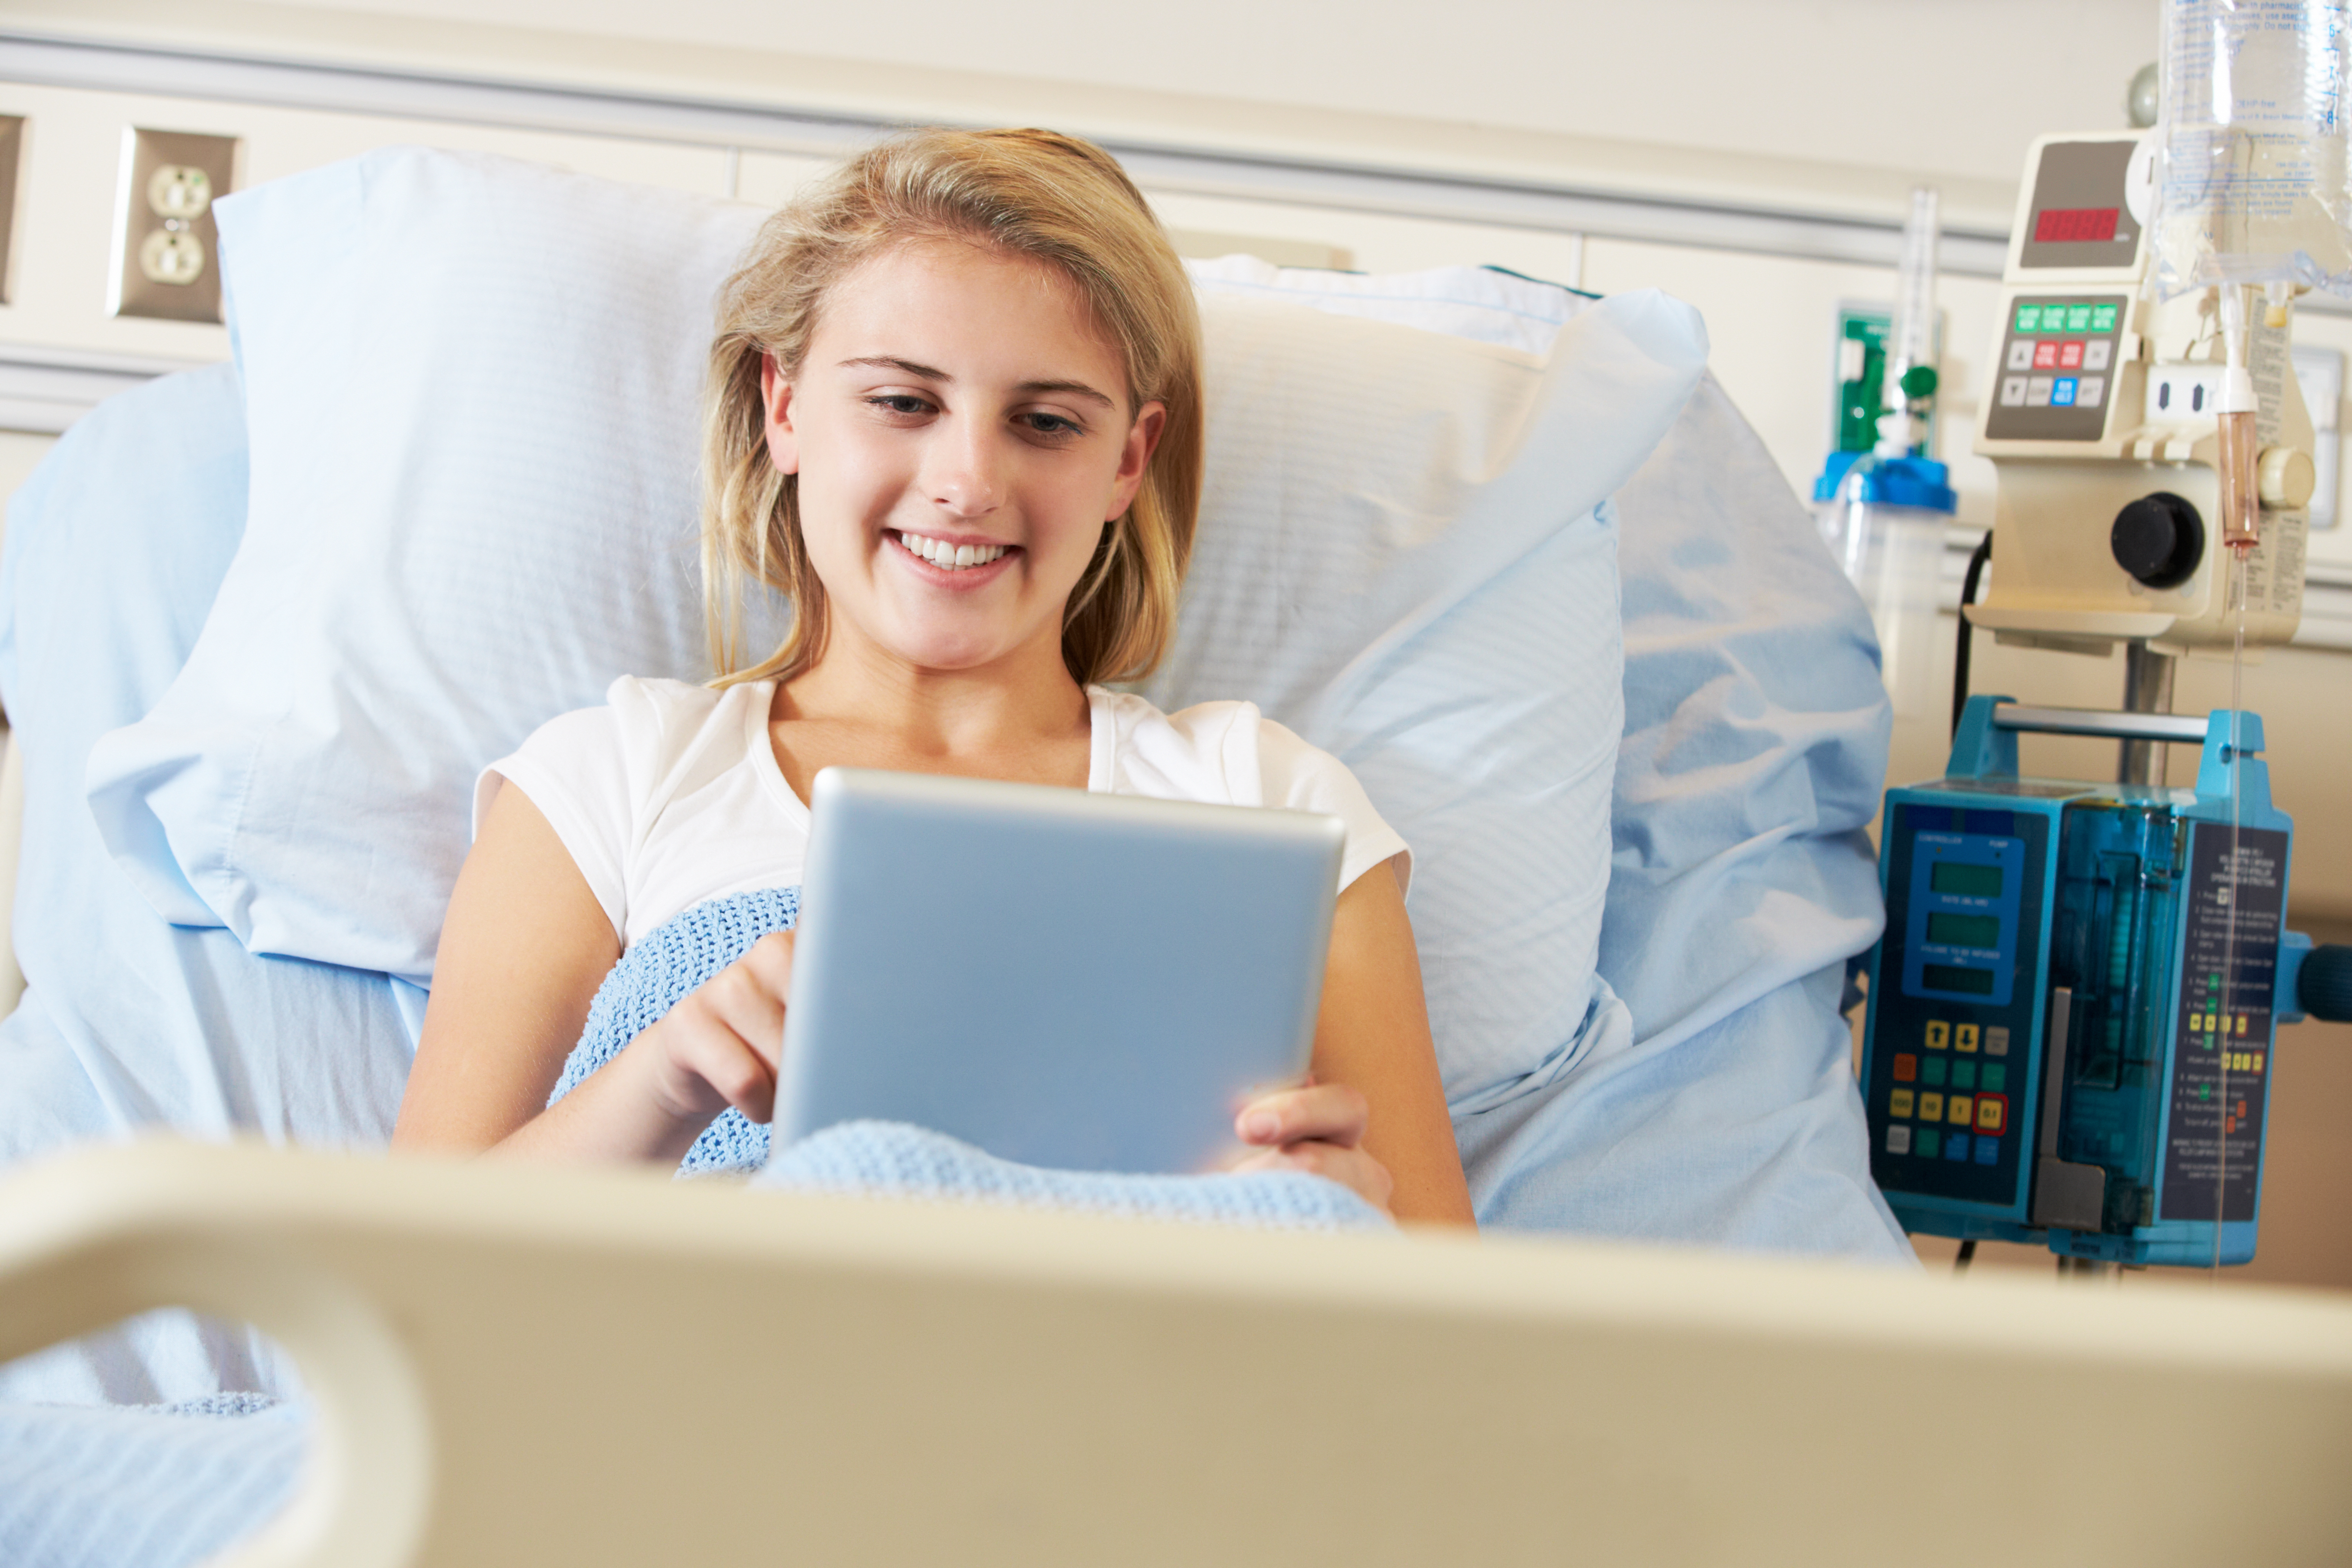 young smiling woman using a tablet in the hospital